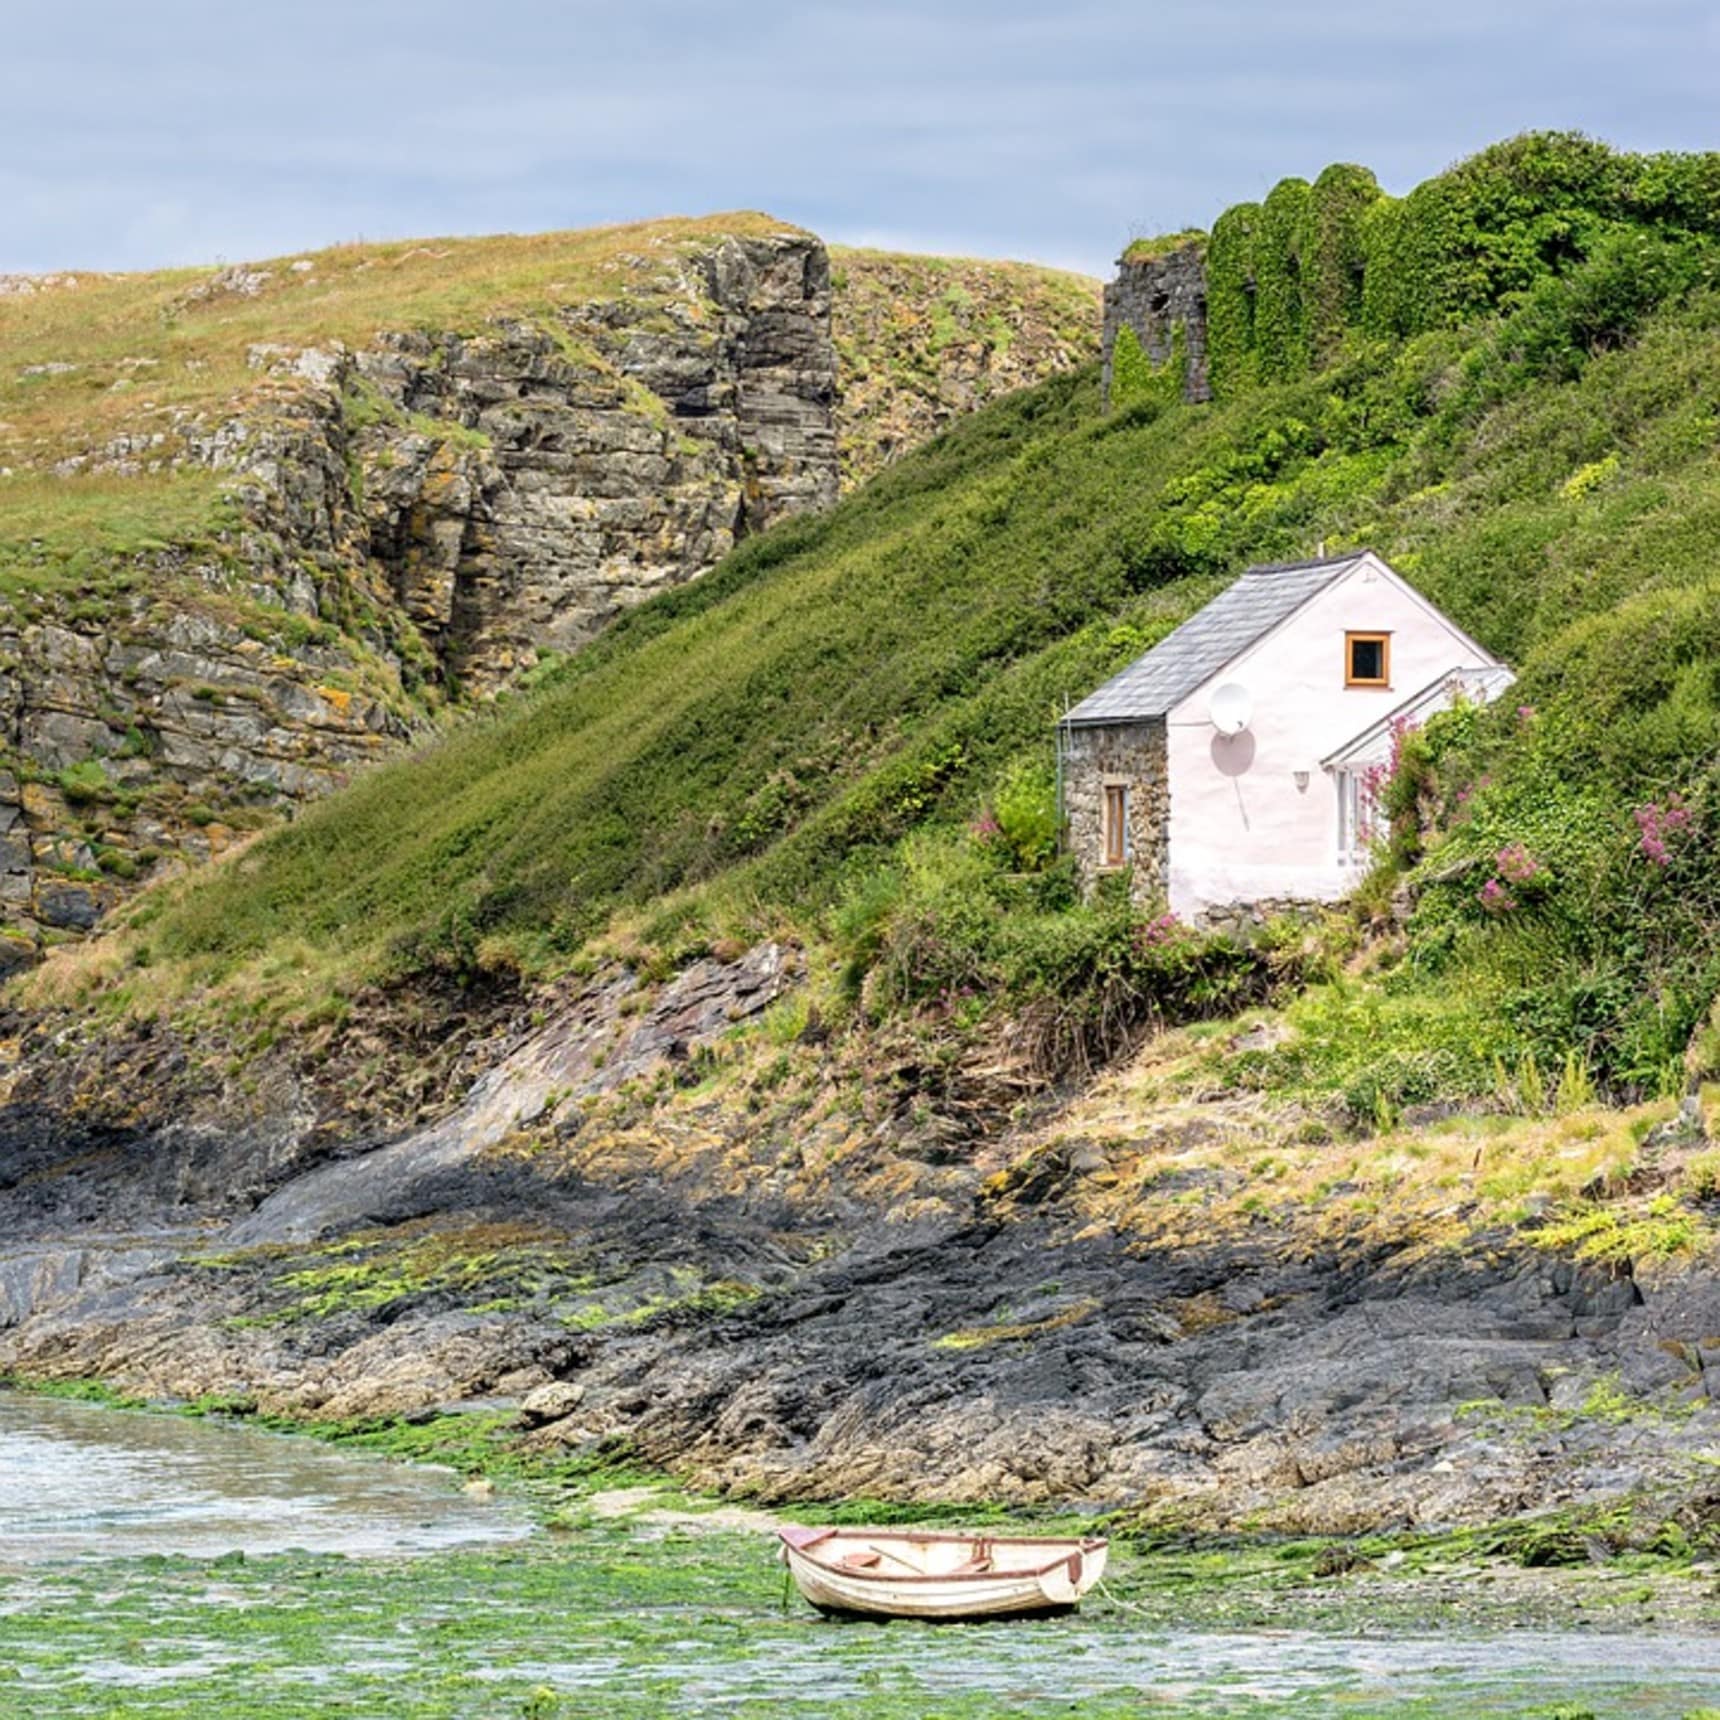 A small lodging stands on the coast of Wales